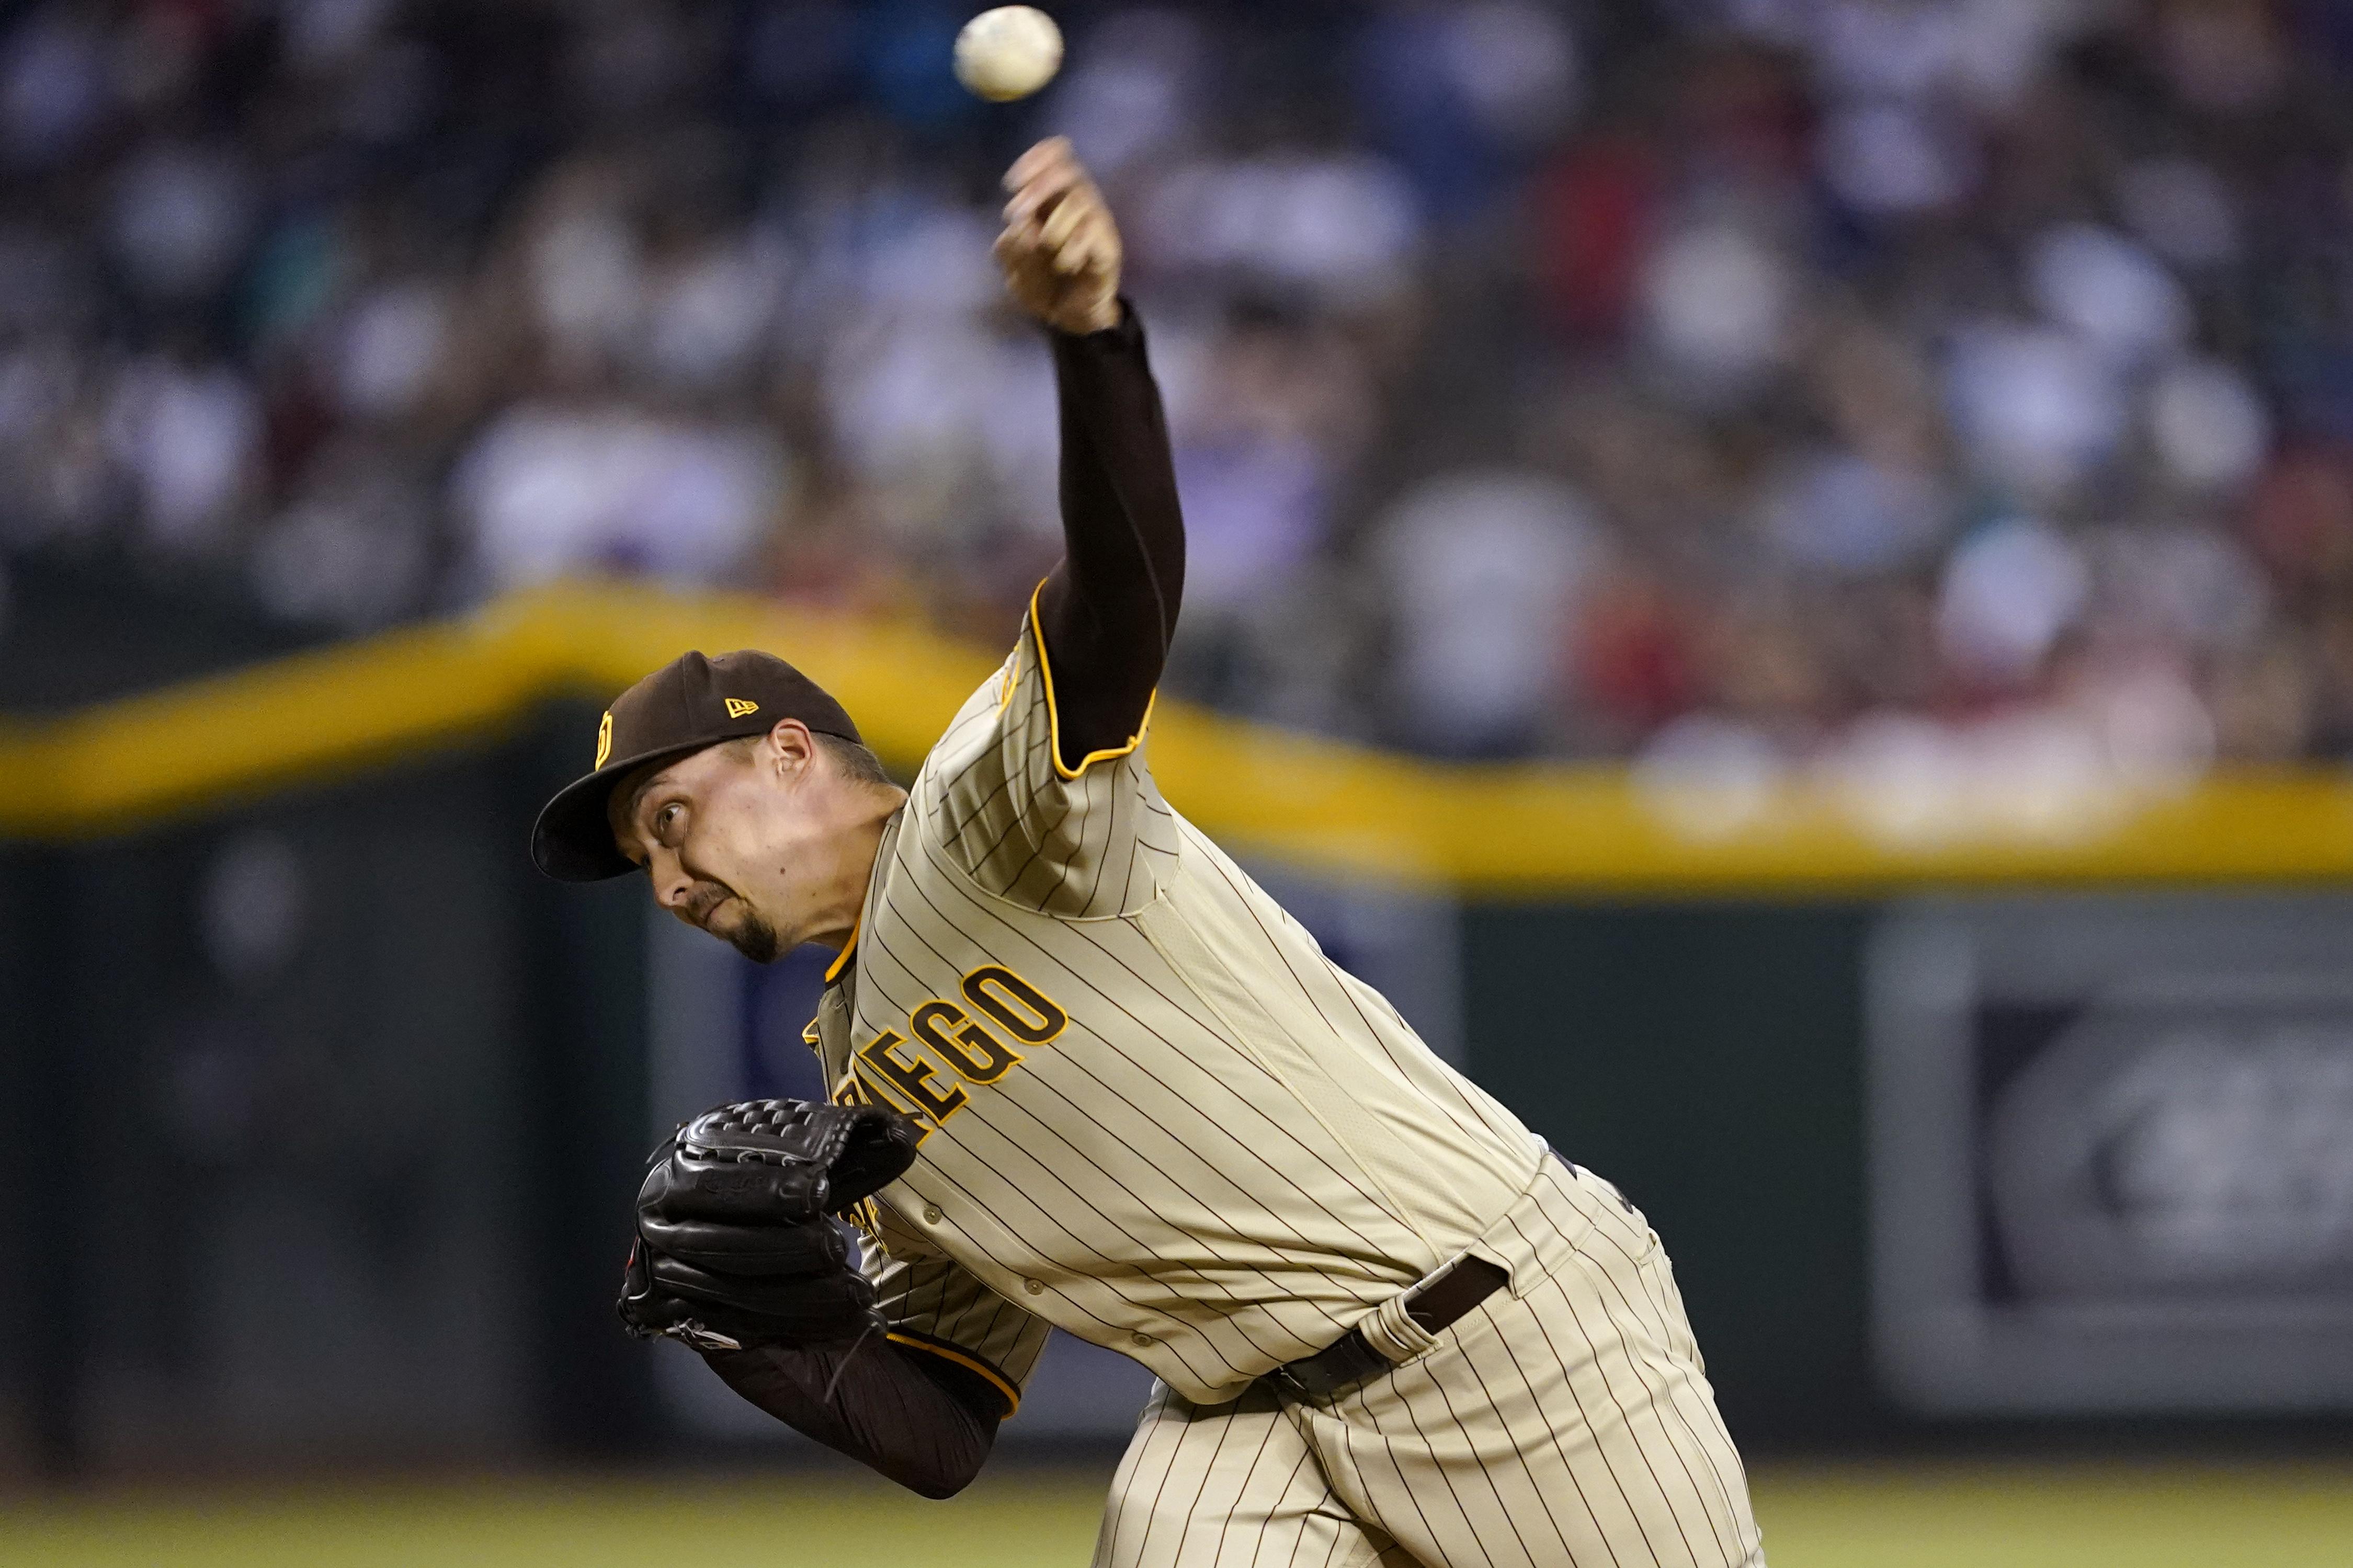 Padres' bunt derby backs dominant Blake Snell in 2-0 win against